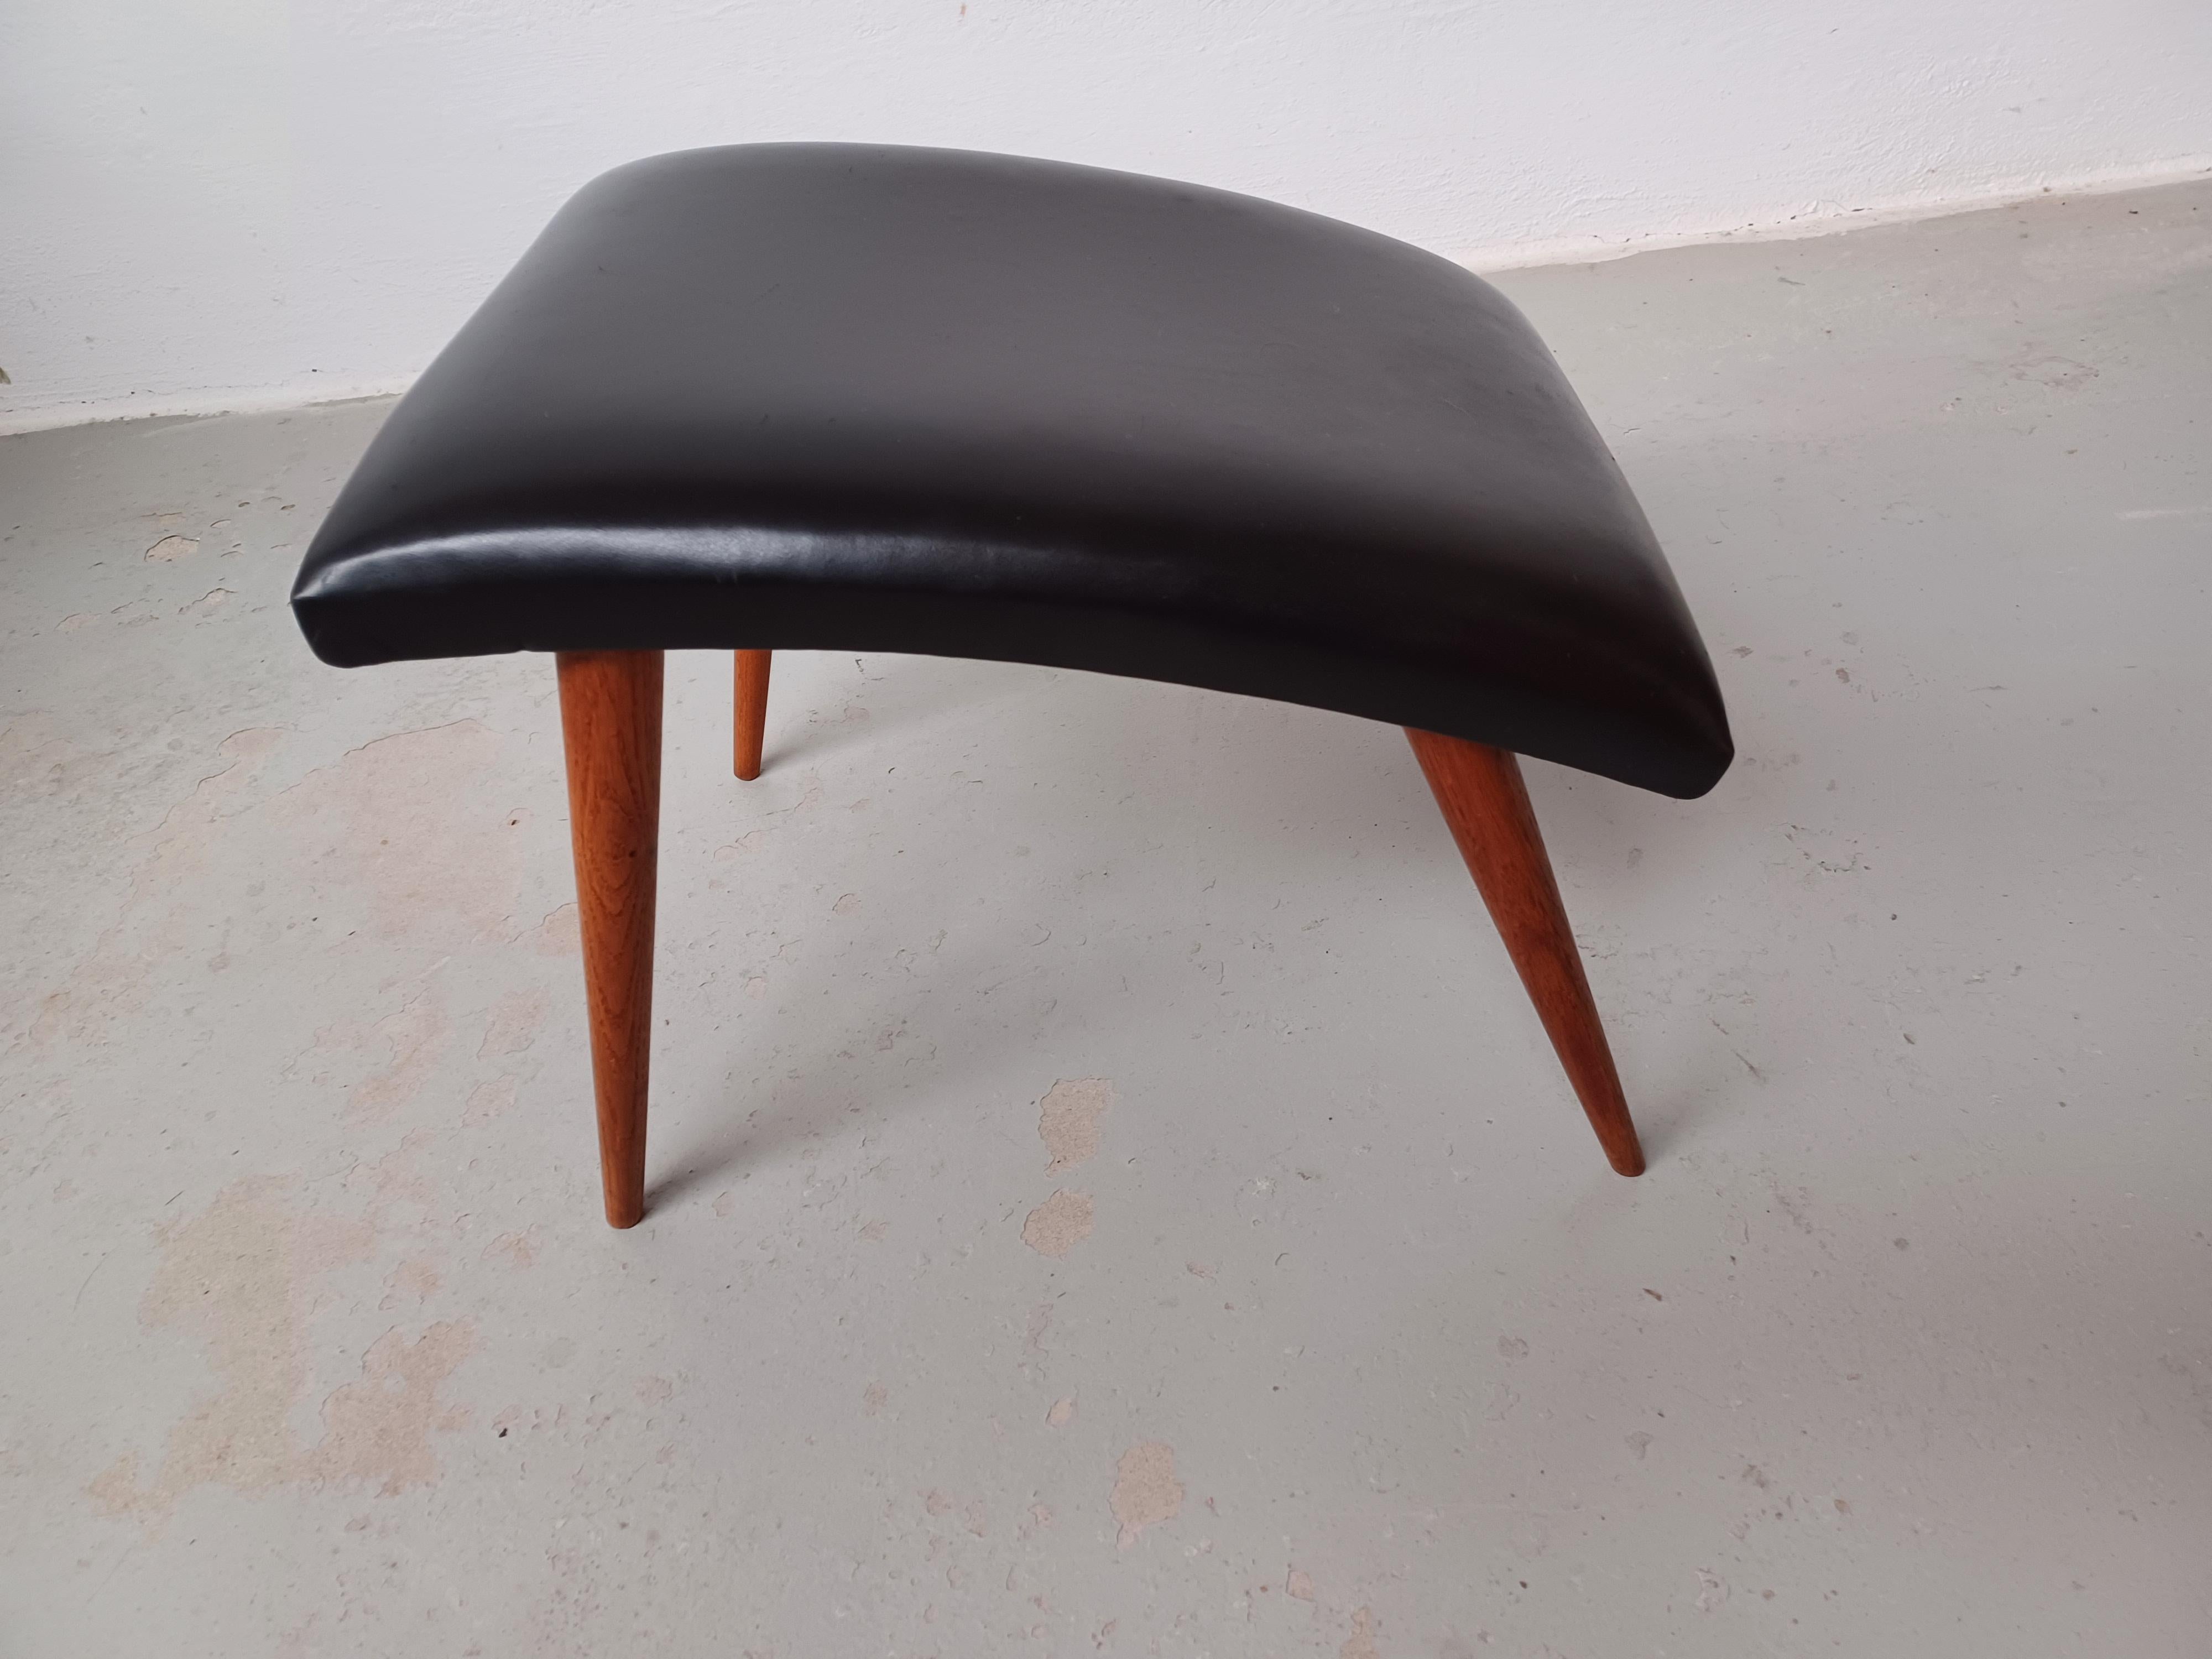 1960's Refinished Danish footstool with leather upholstery.

Danish footstool in slimlined minimalistic yet advanced Scandinavian modern design with it's combination of straight simple lines combined with it's organic curved seat and